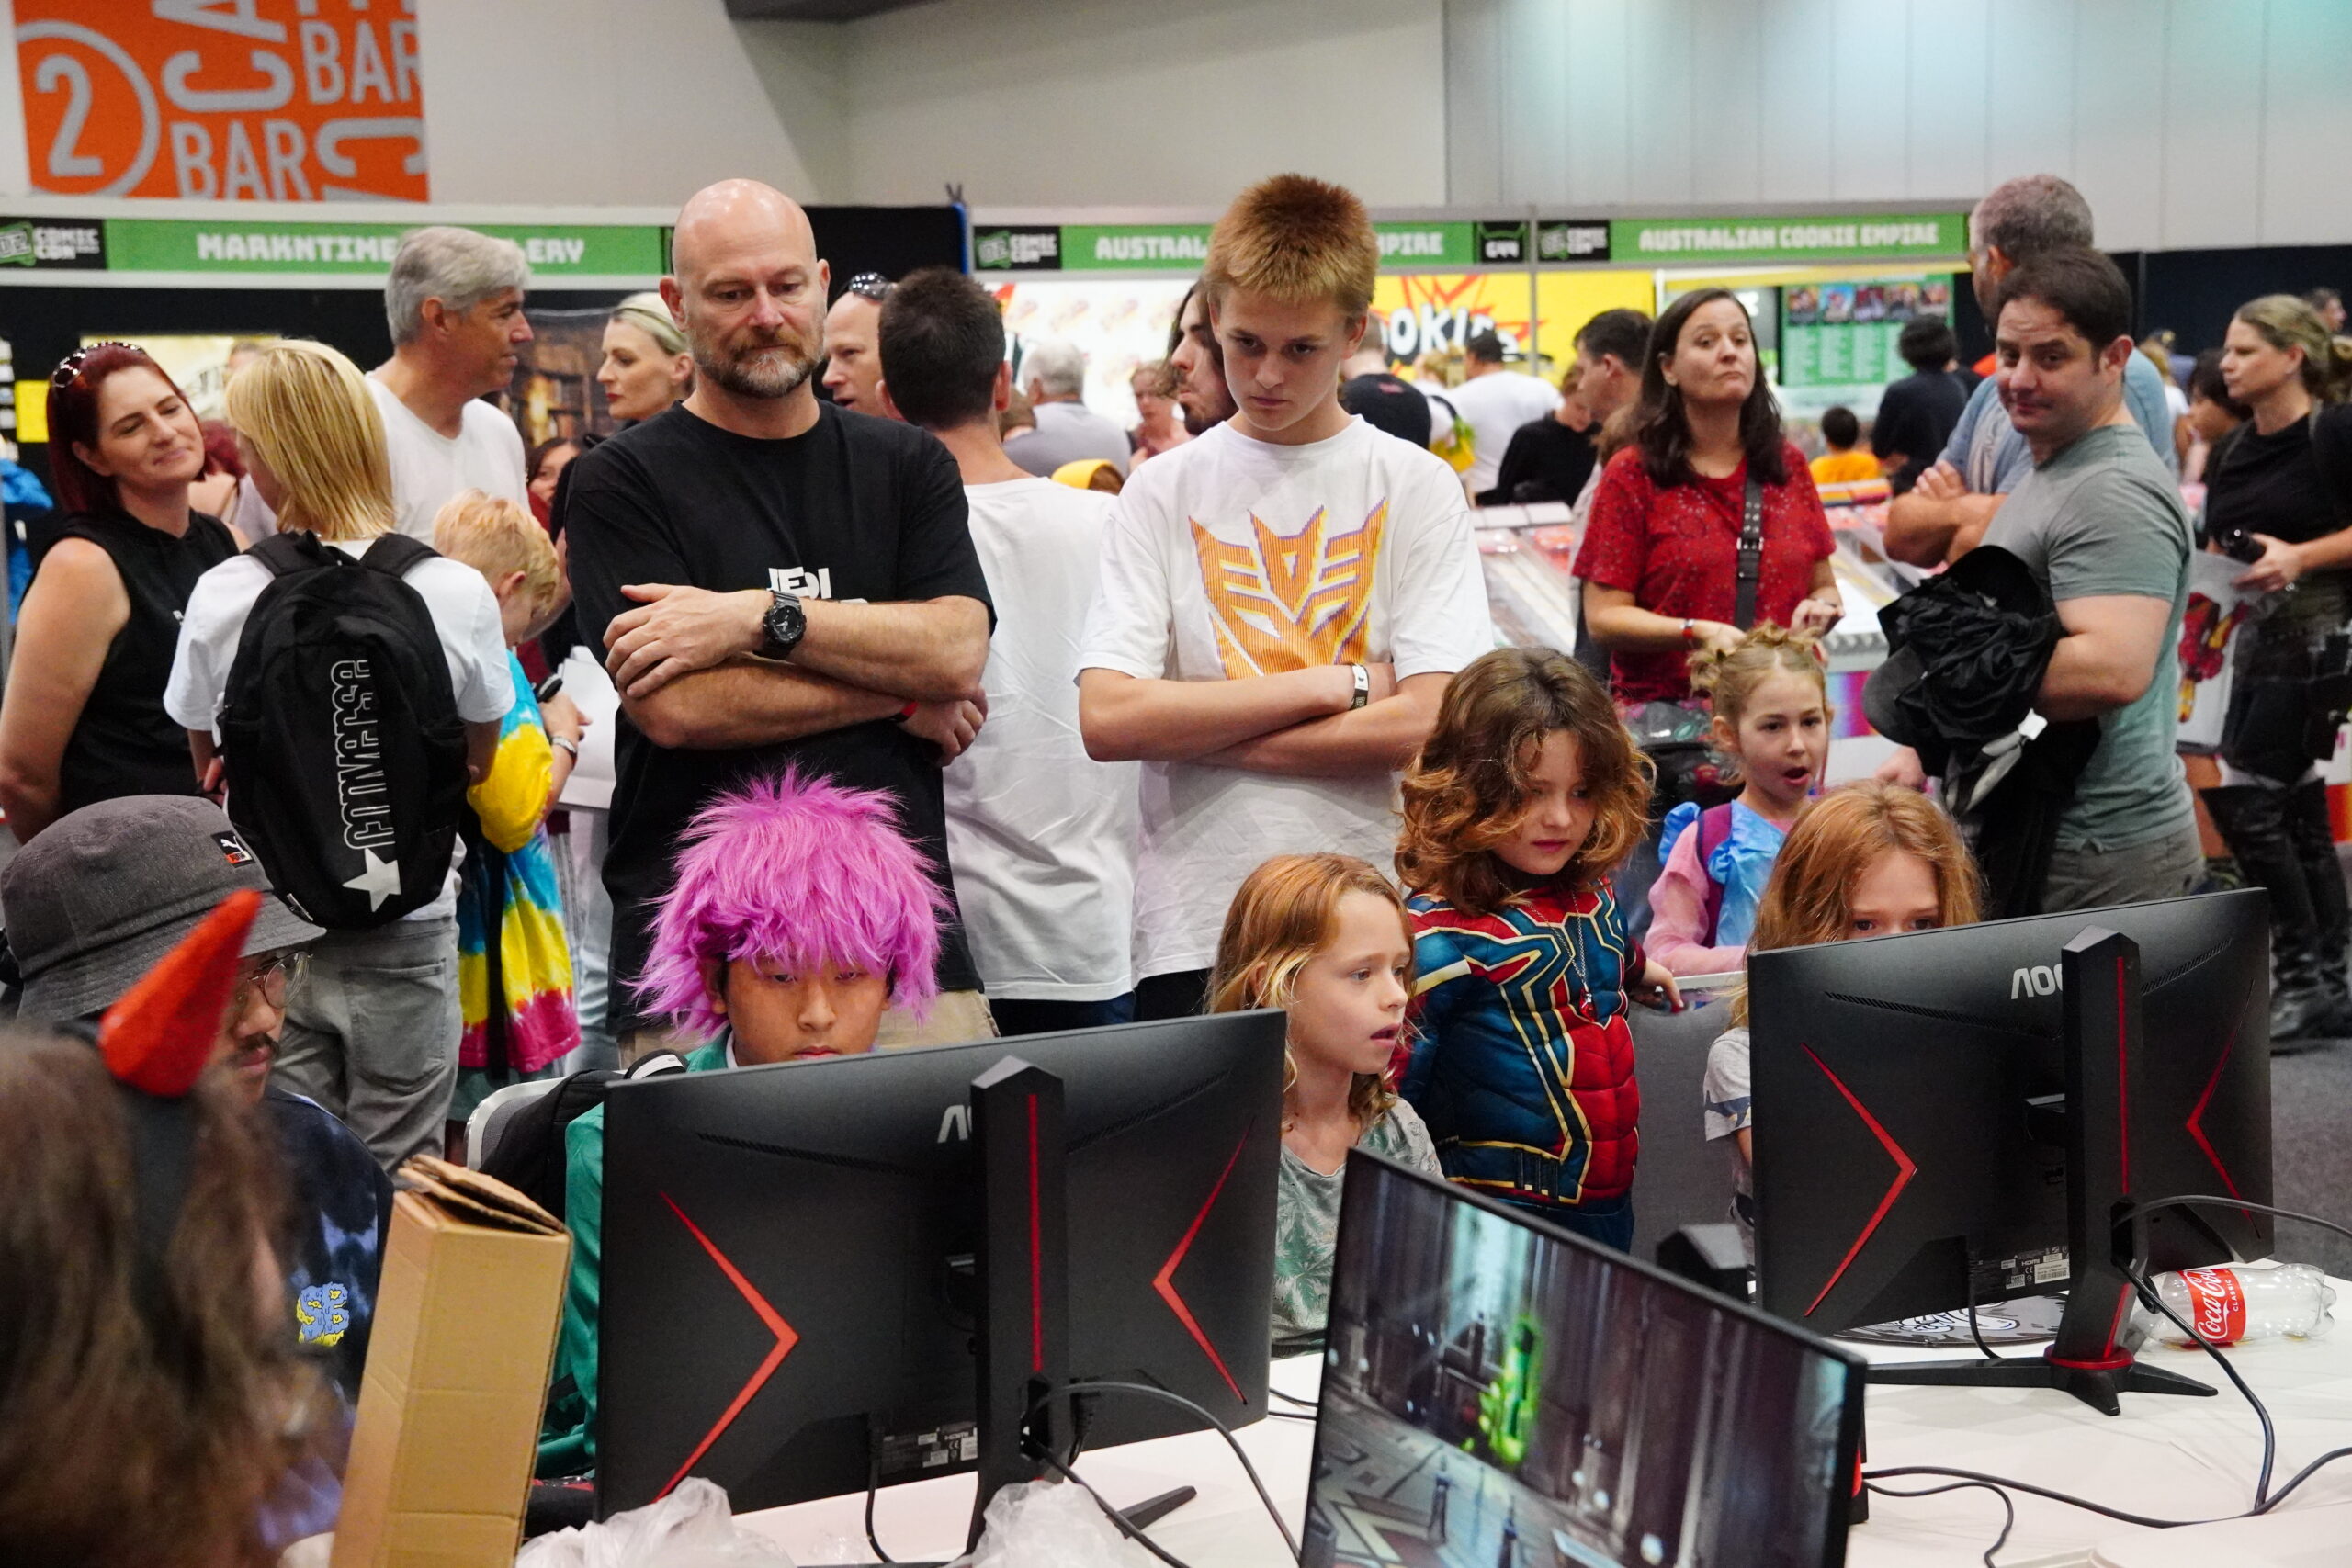 Oz Comic Con’s triumphant return to Perth features exciting AEL gaming zone